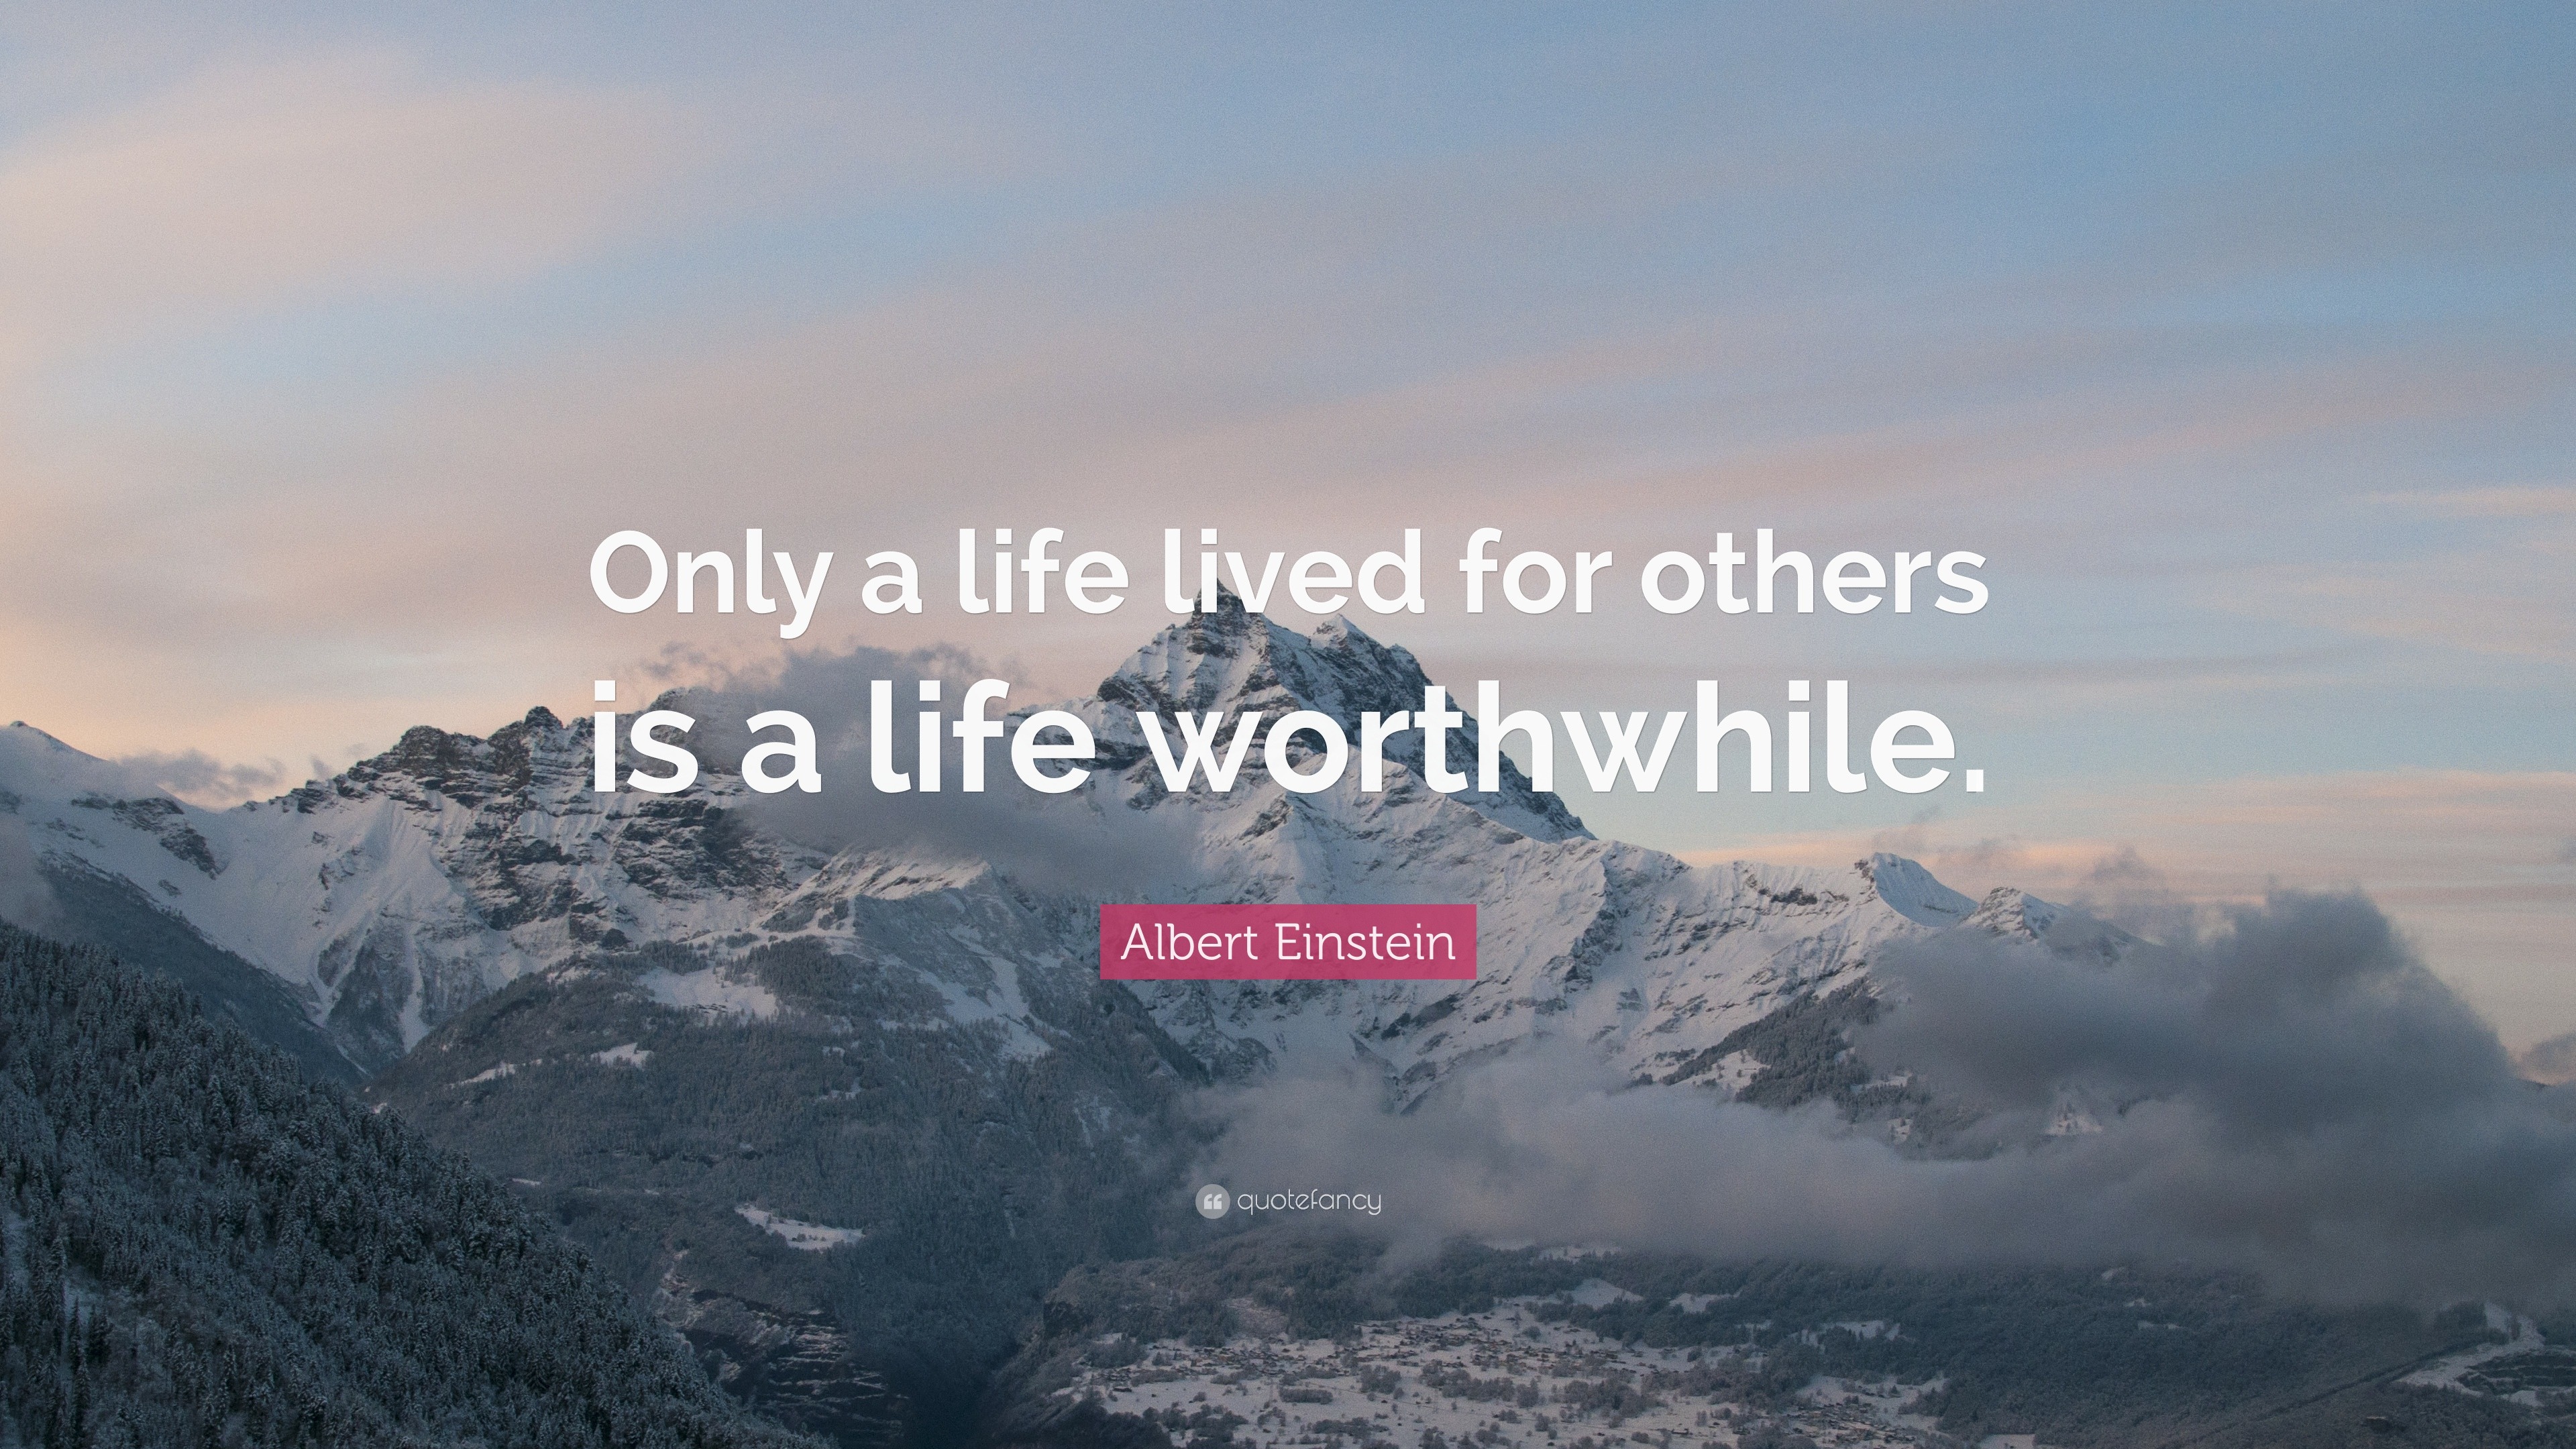 Albert Einstein Quote: "Only a life lived for others is a ...